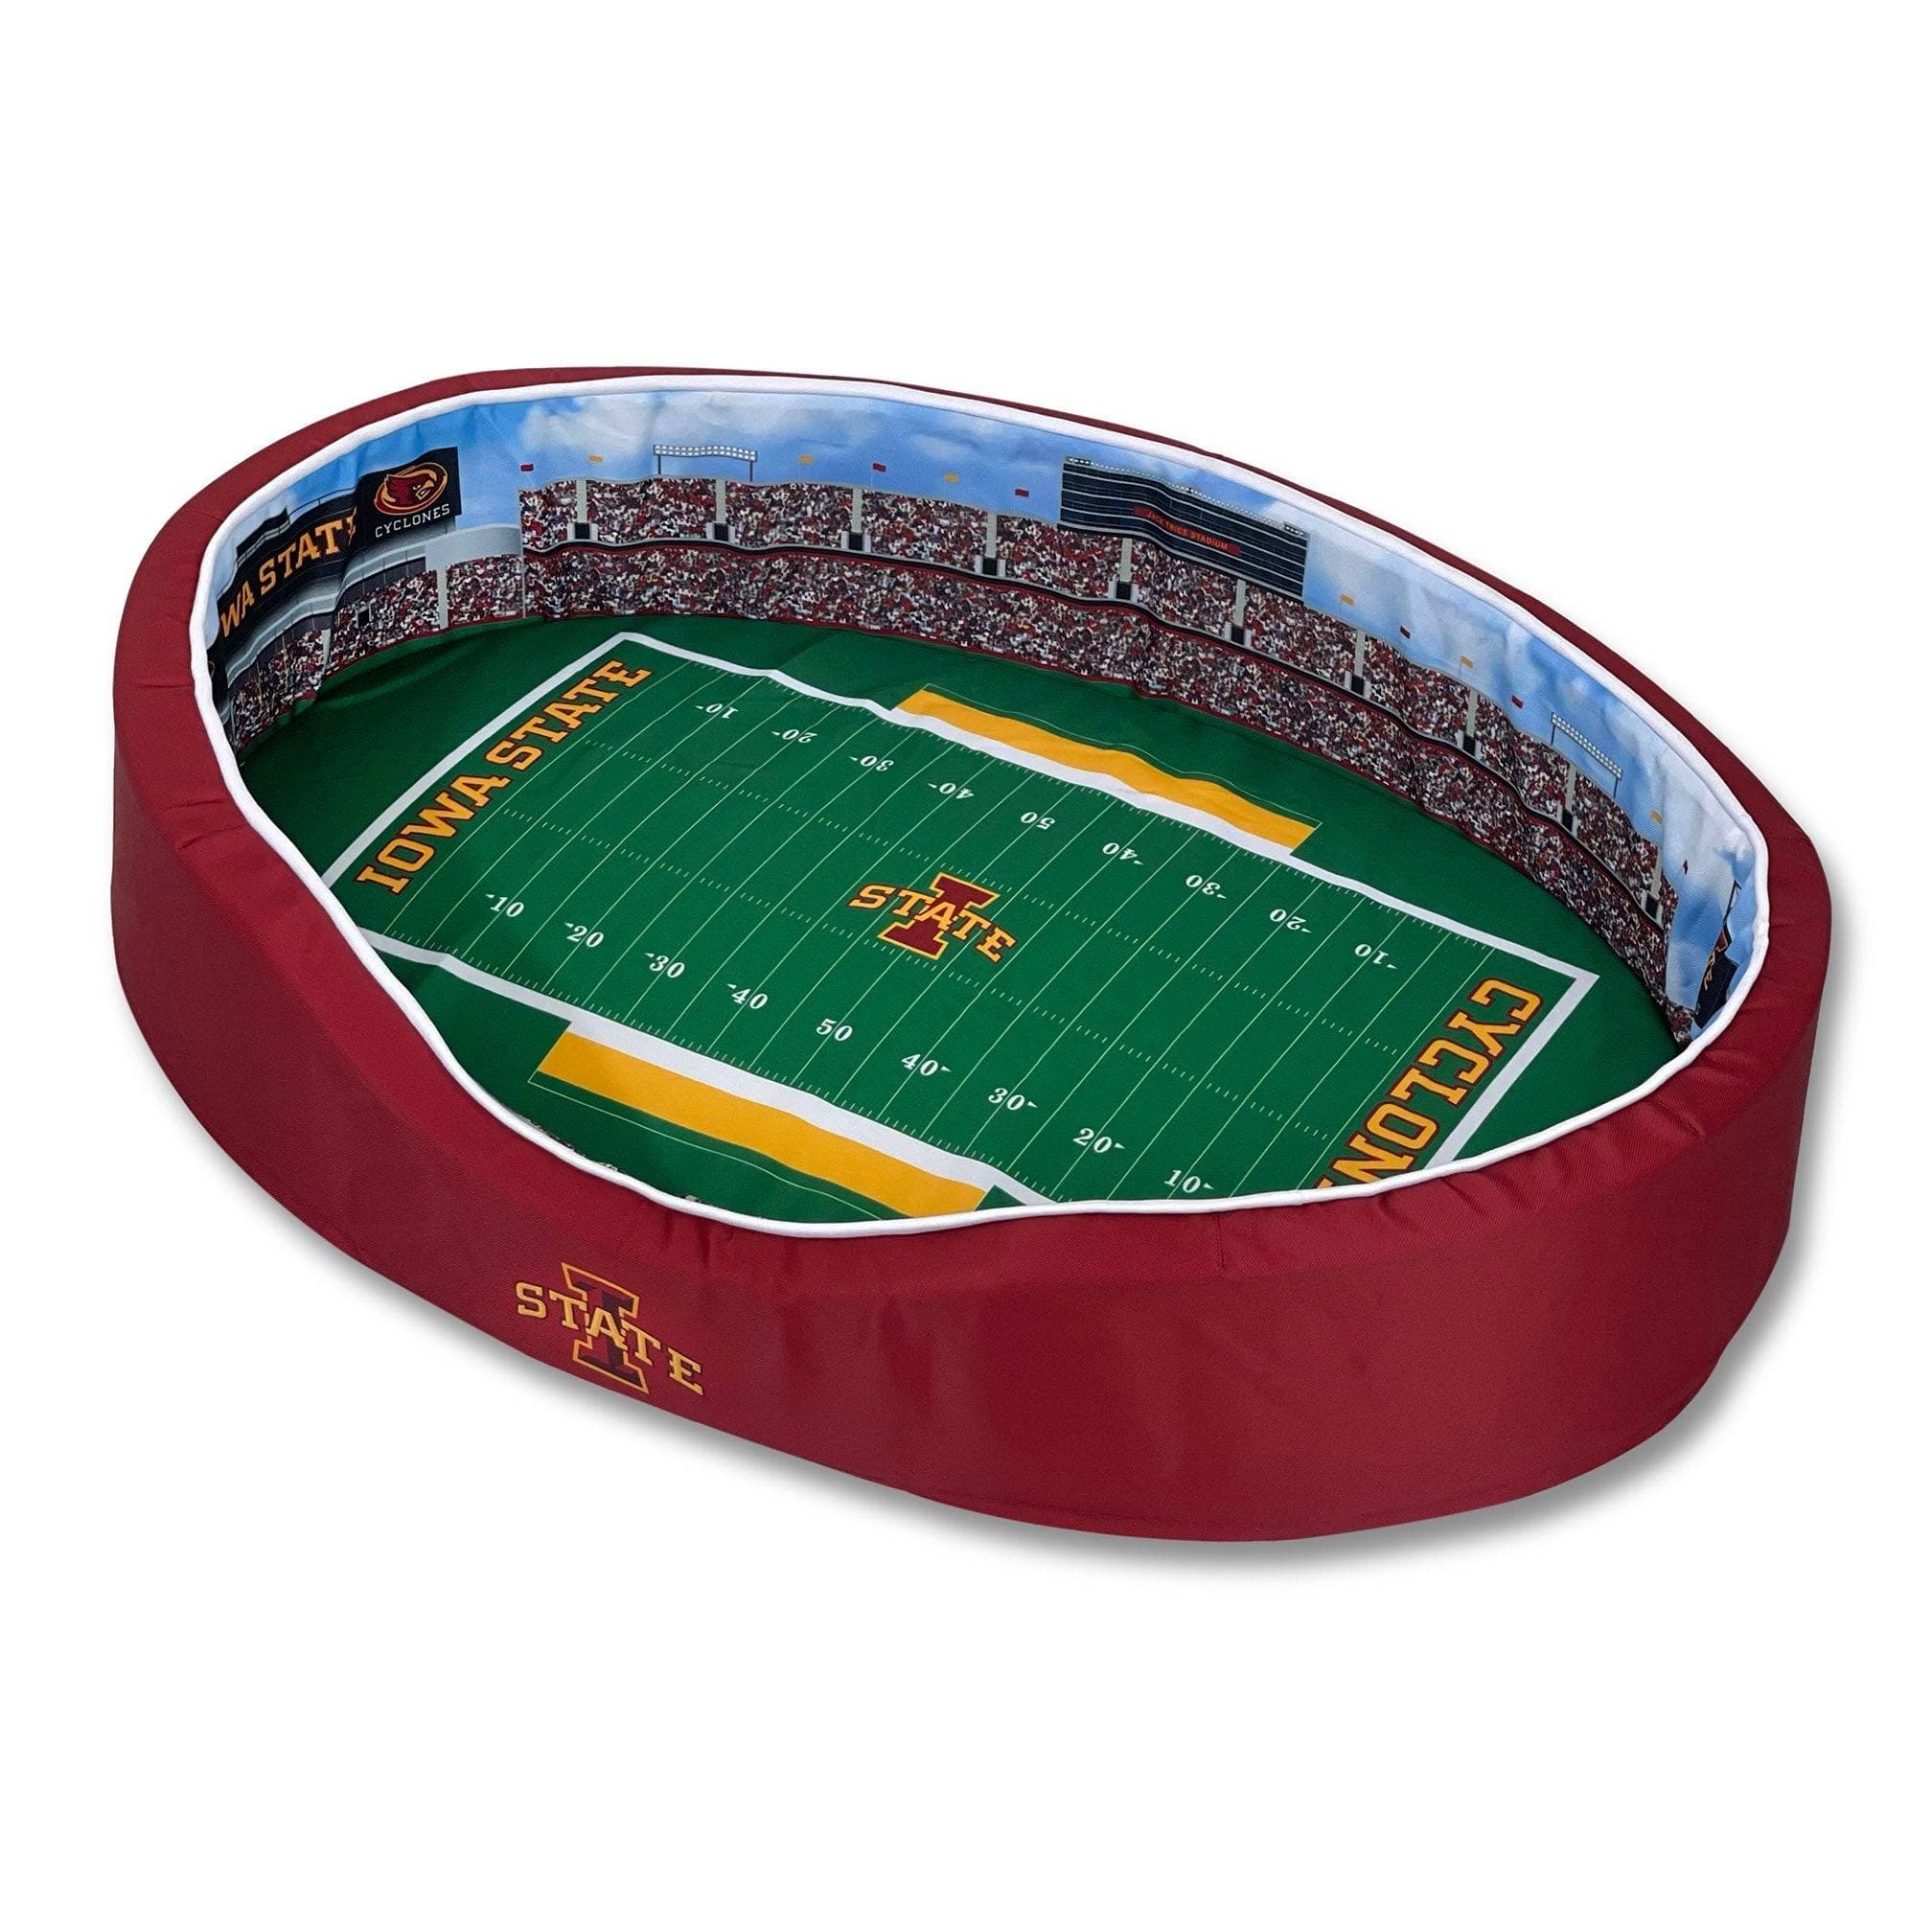 StadiumSpot Louisville Football Stadium Dog Bed - Authentic Cardinals  Graphics, Patented Design - Made from Durable, Eco-Friendly Materials -  Small